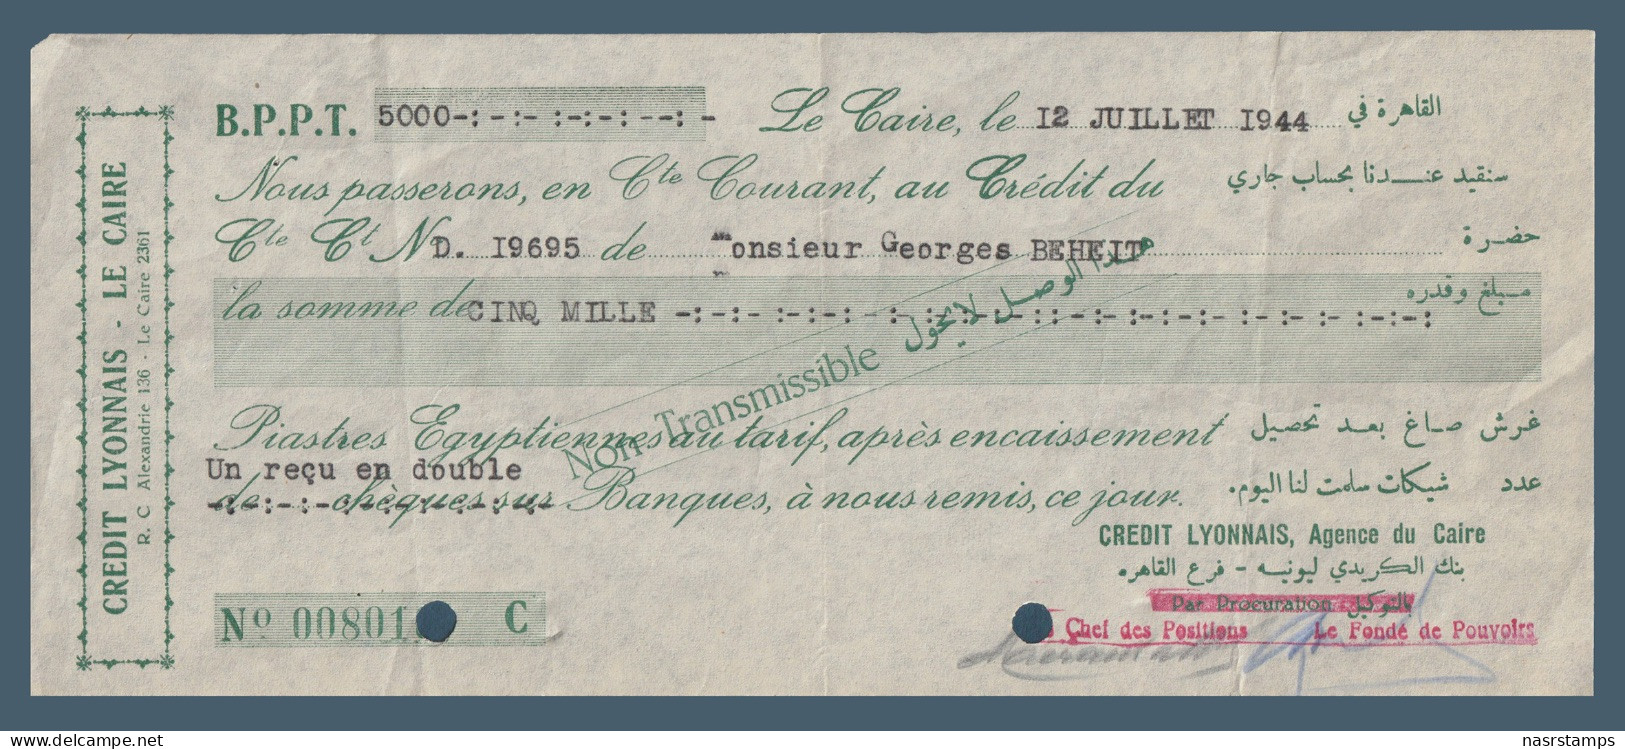 Egypt - 1944 - Vintage Check - ( Credit Lyonnais Bank - Cairo ) - Cheques & Traveler's Cheques